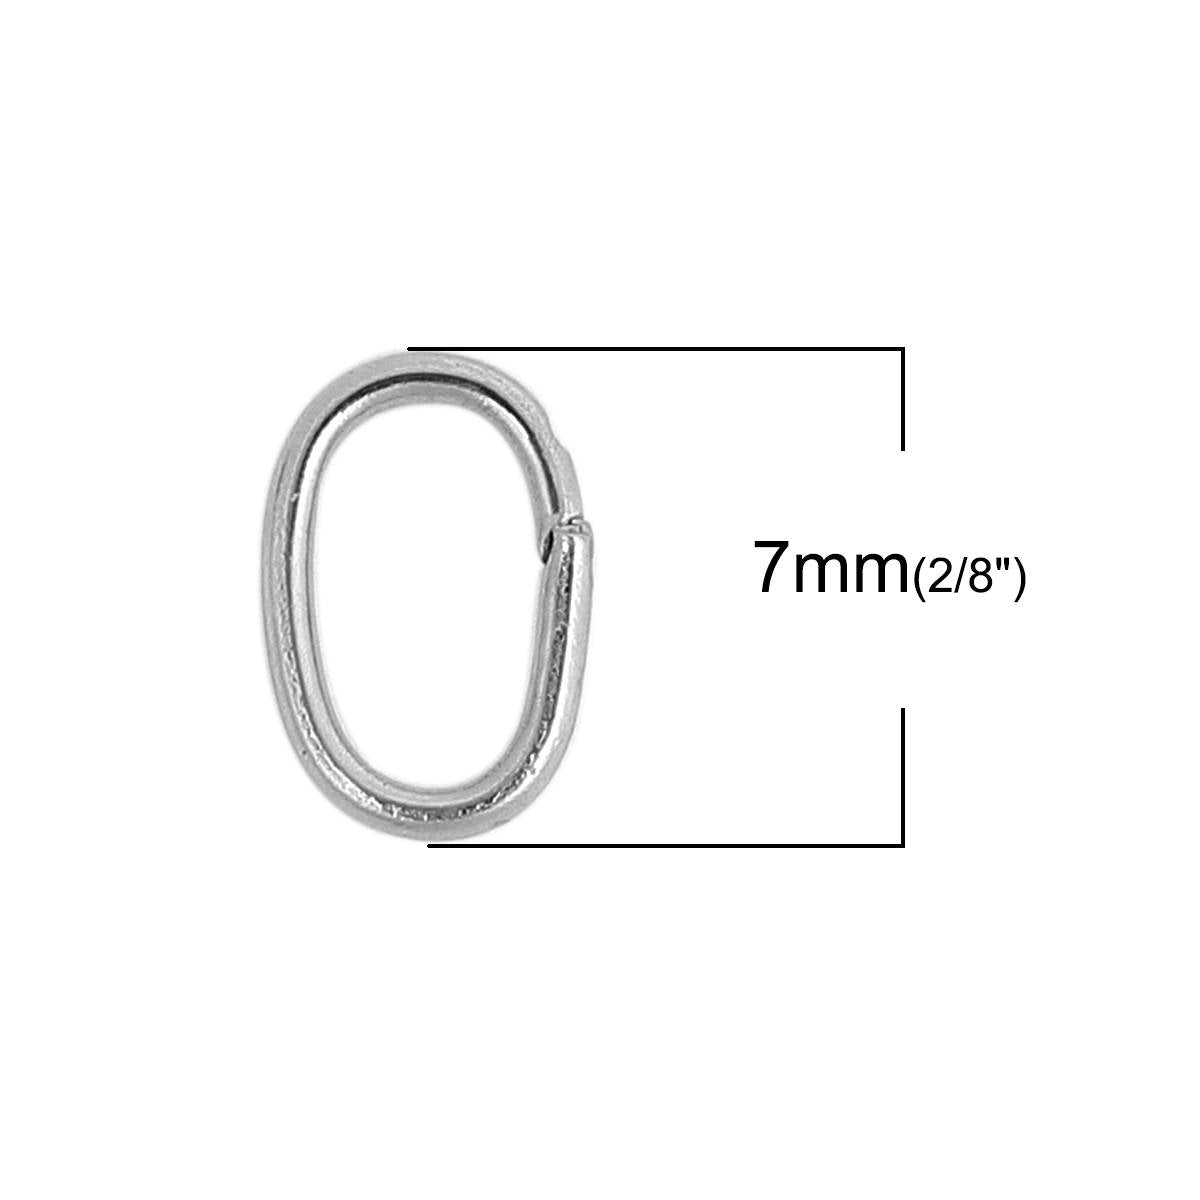 Hypoallergenic Silver Oval JumpRings 7, 8 or 10mm - 10pcs Stainless Steel Opened Jump Rings